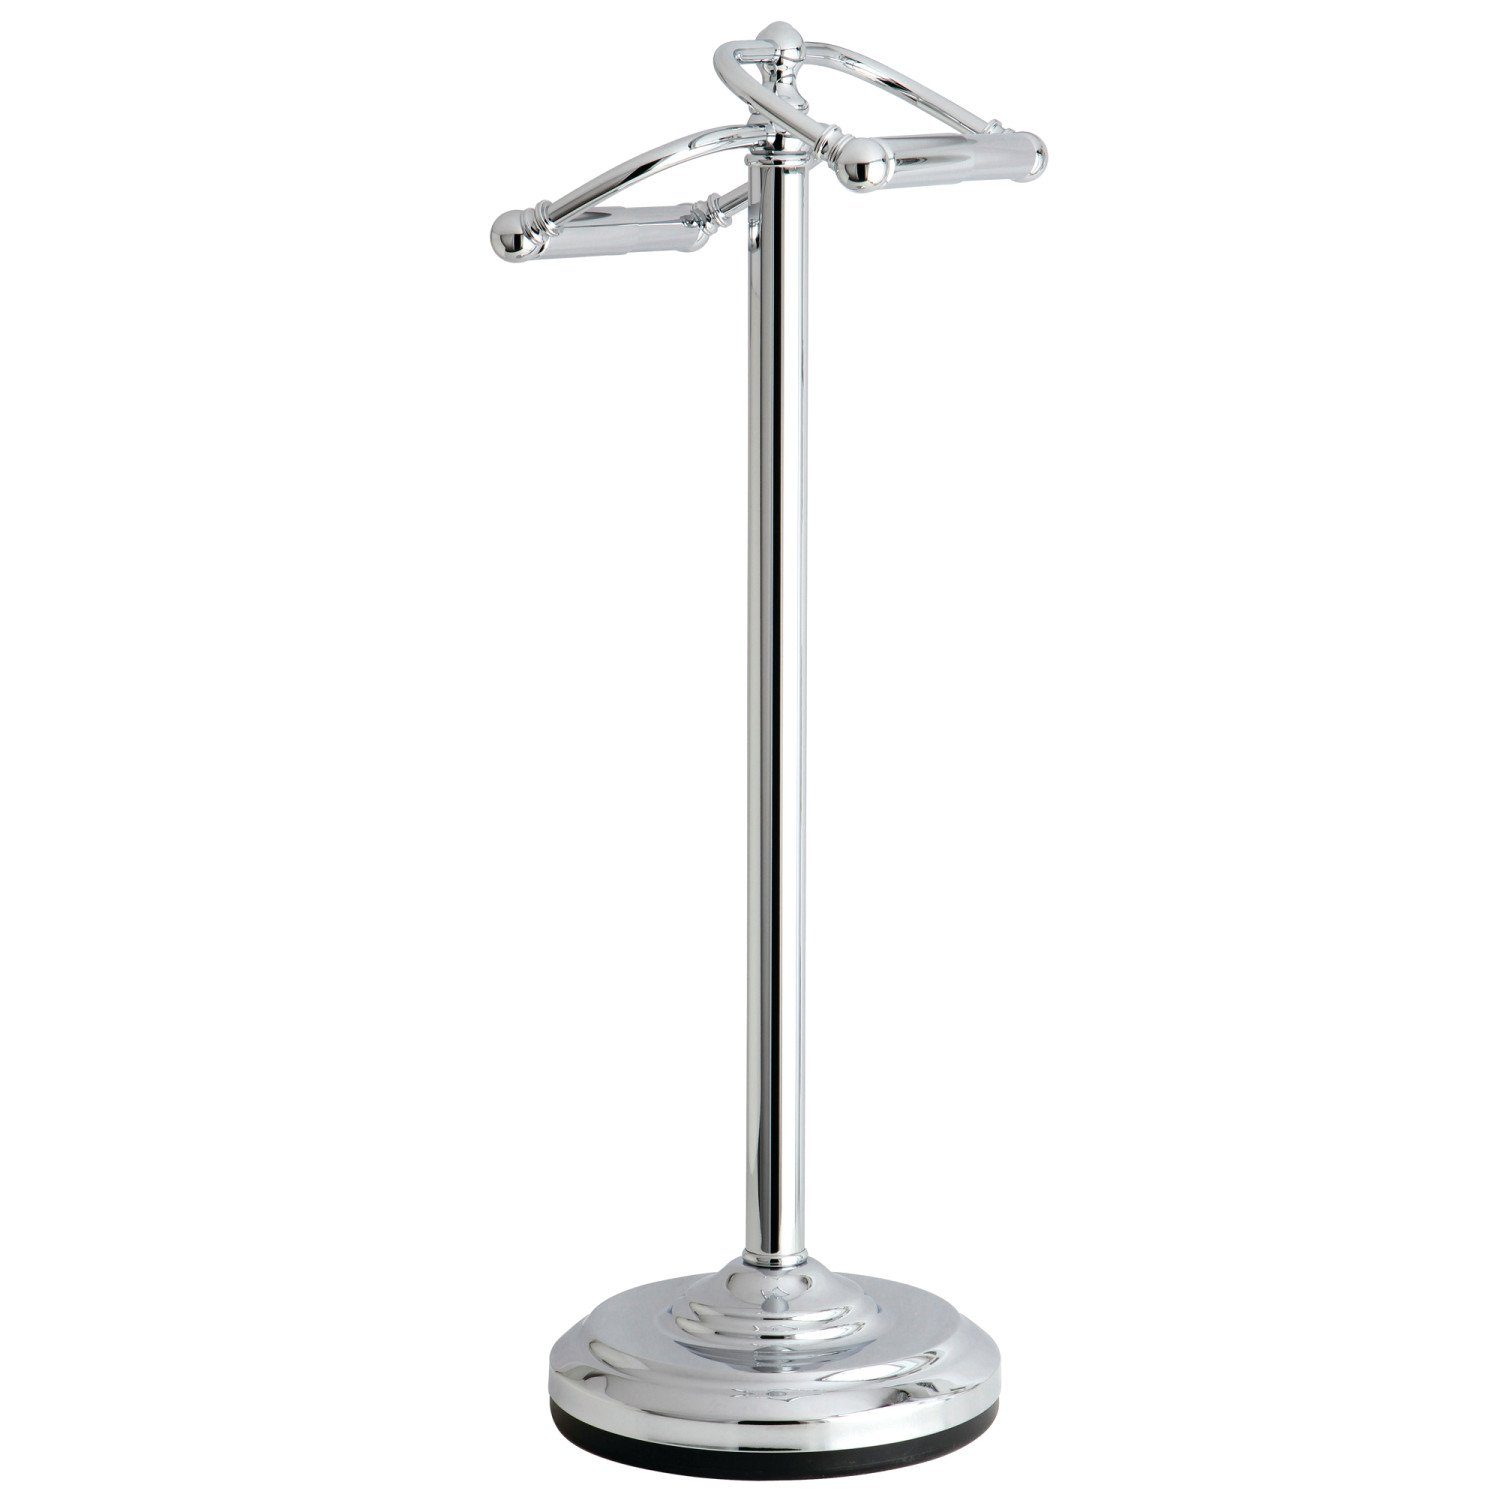 Acrylic and Polished Nickel Free Standing Toilet Paper Holder + Reviews